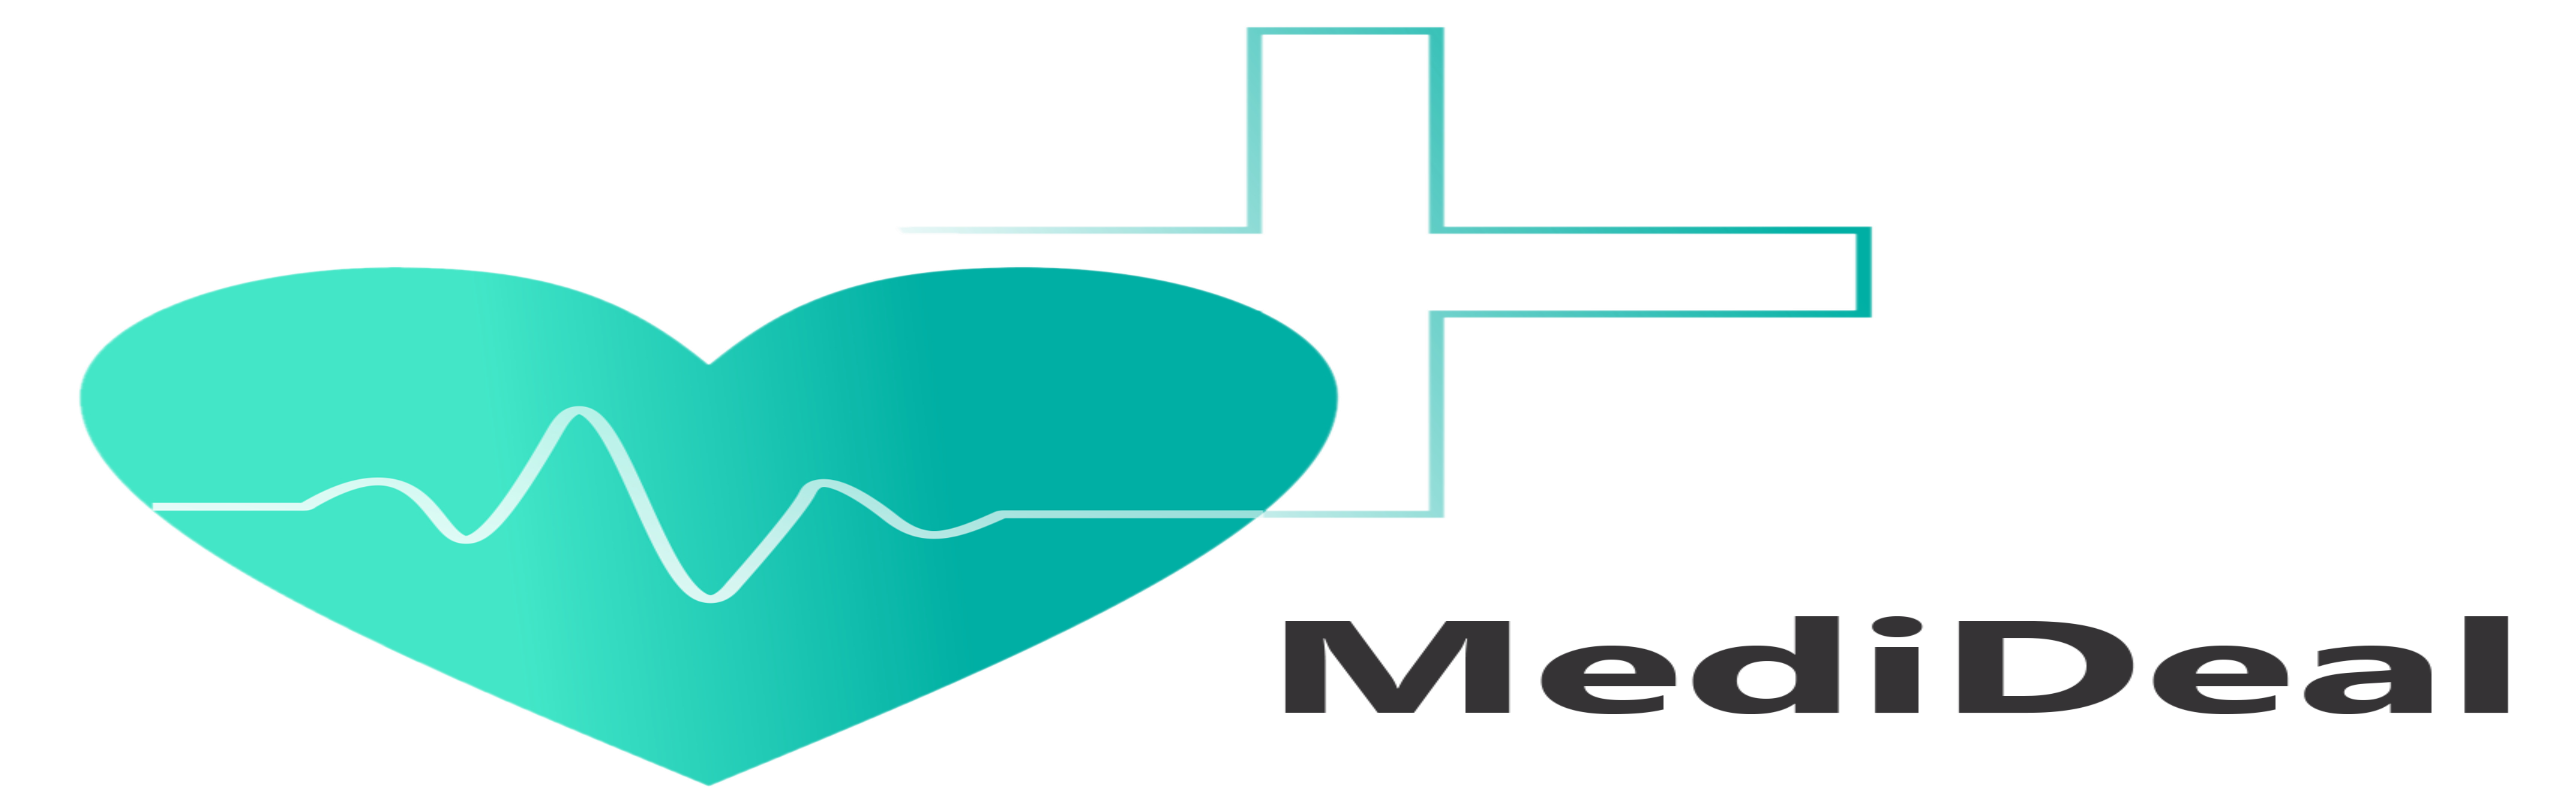 Welcome to Medideal